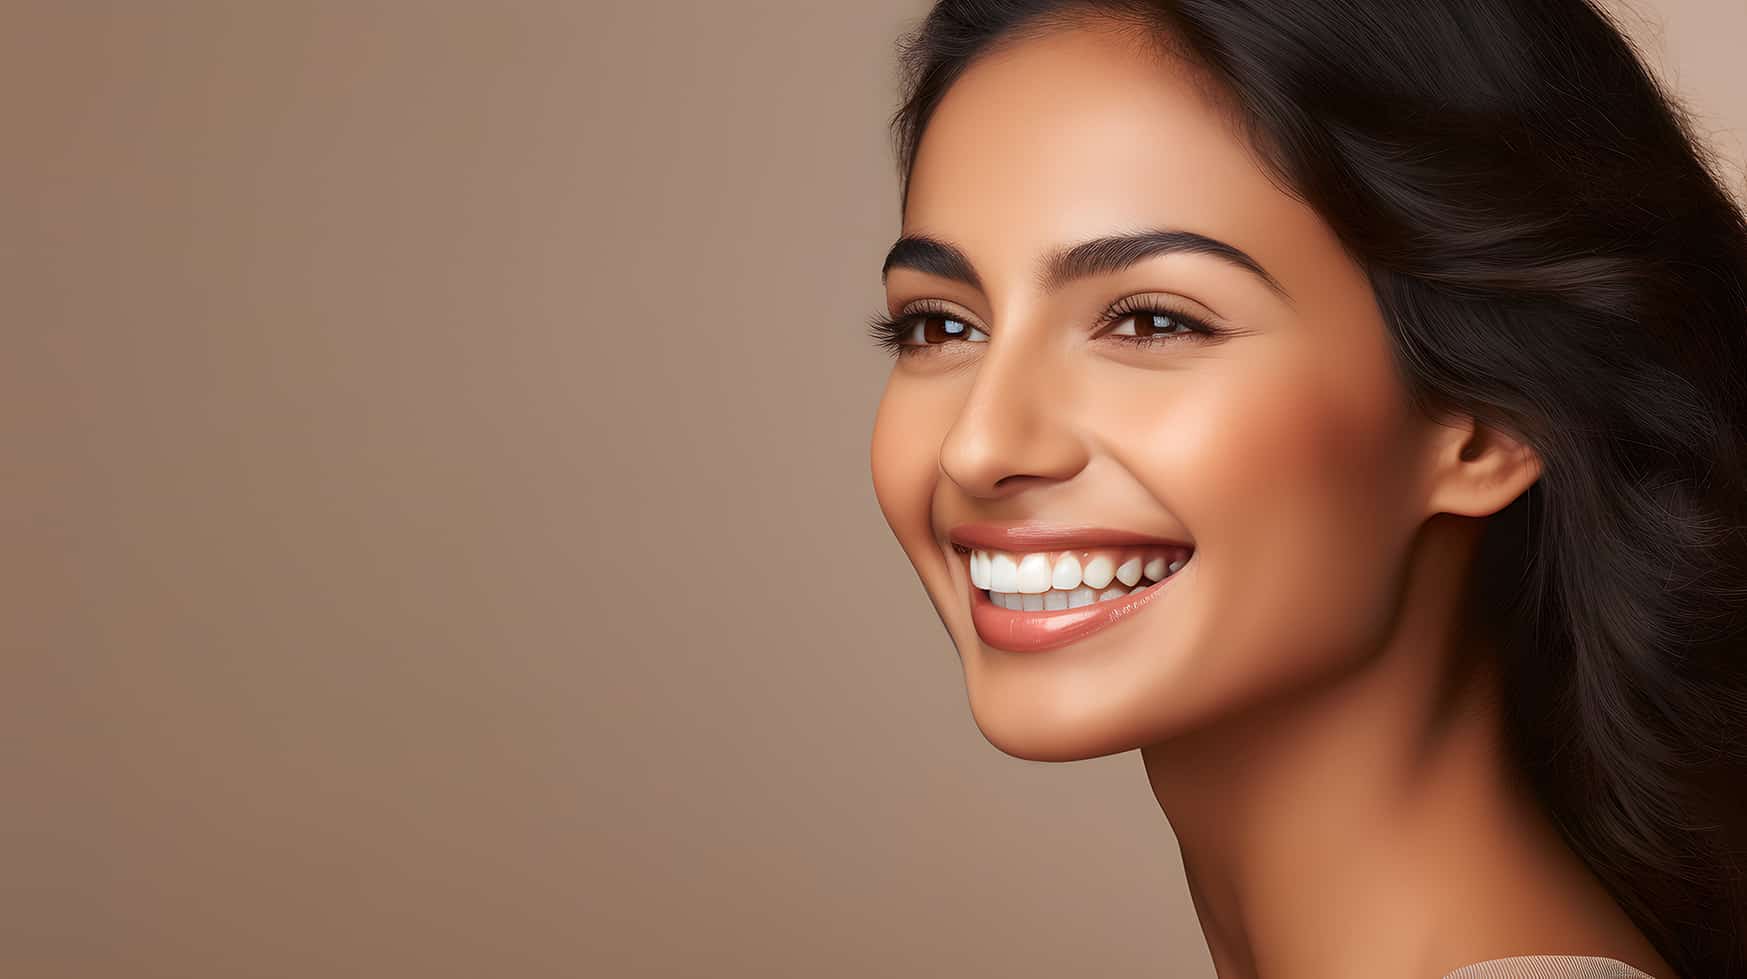 woman smiling showing cosmetic dentistry